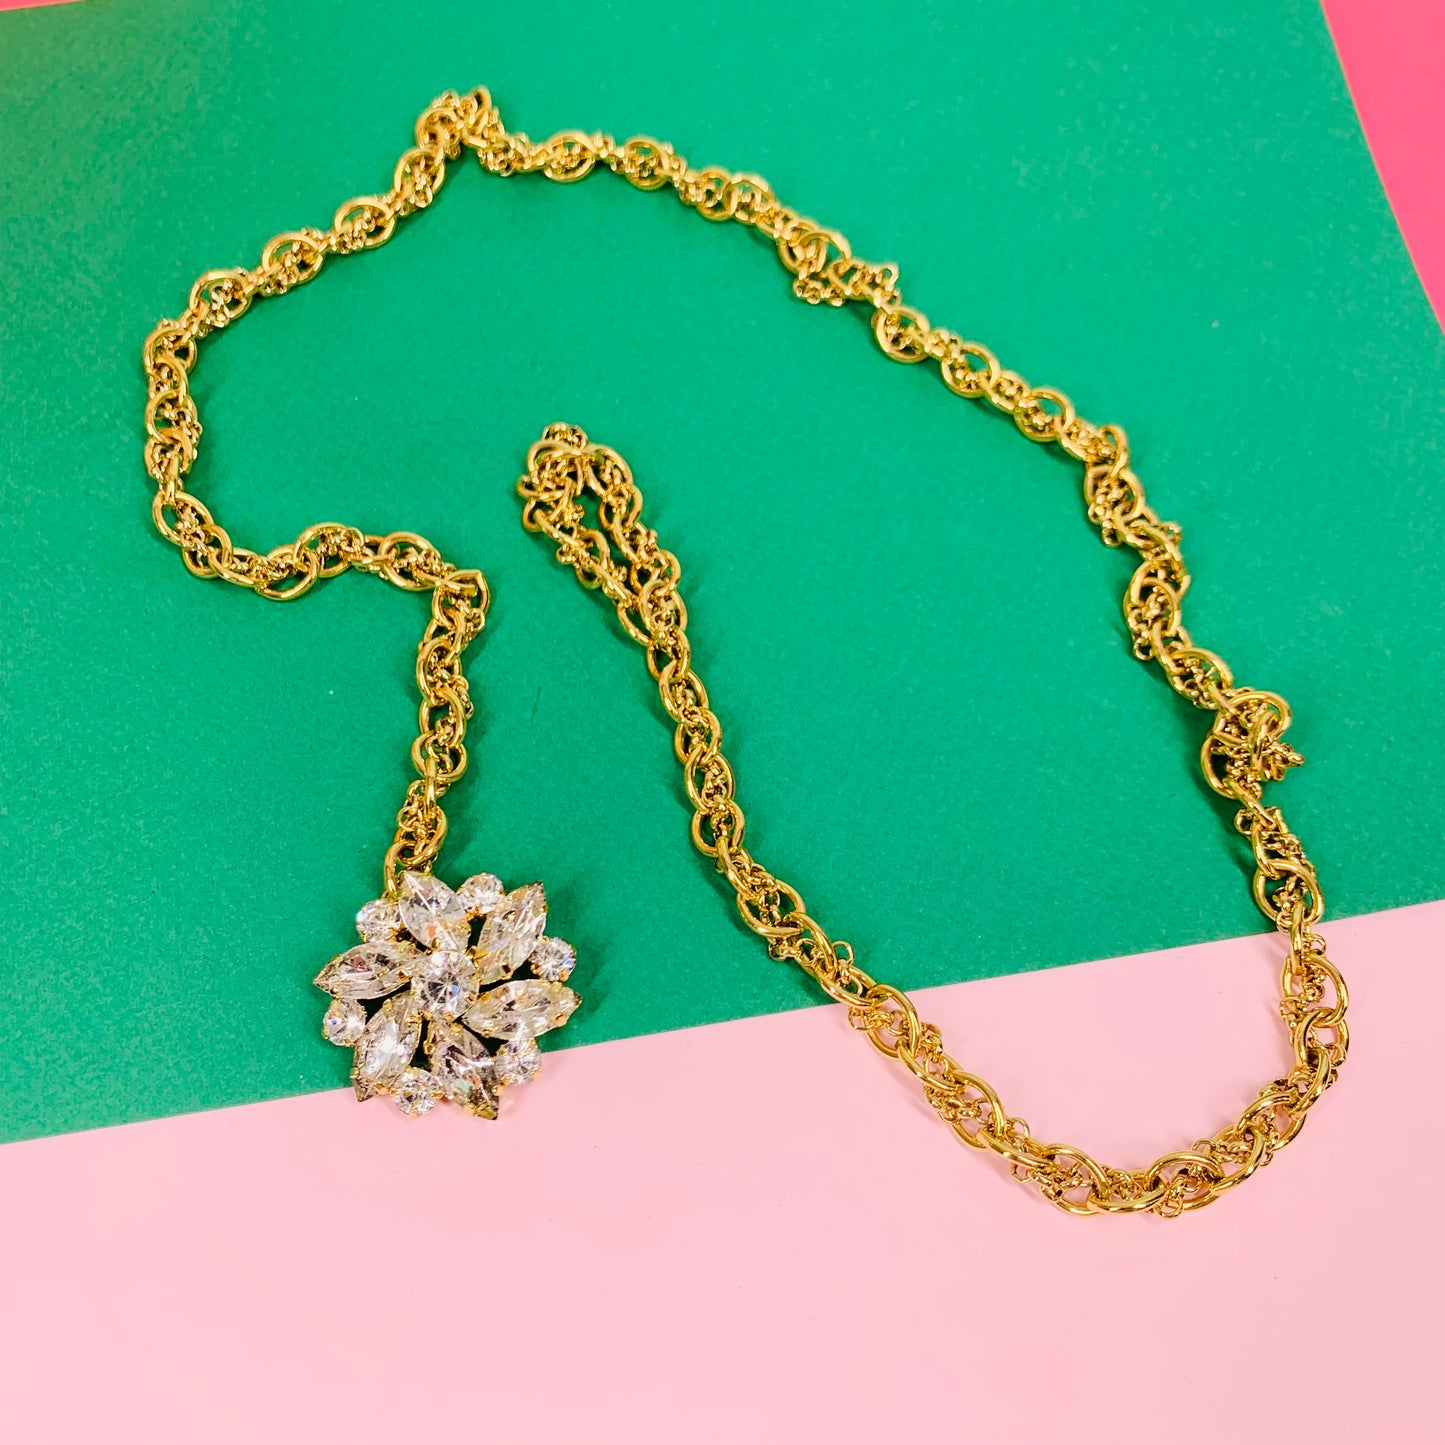 Extremely rare 1980s triple plated thick and heavy fob gold necklace/belt with rhinestones flower pendant